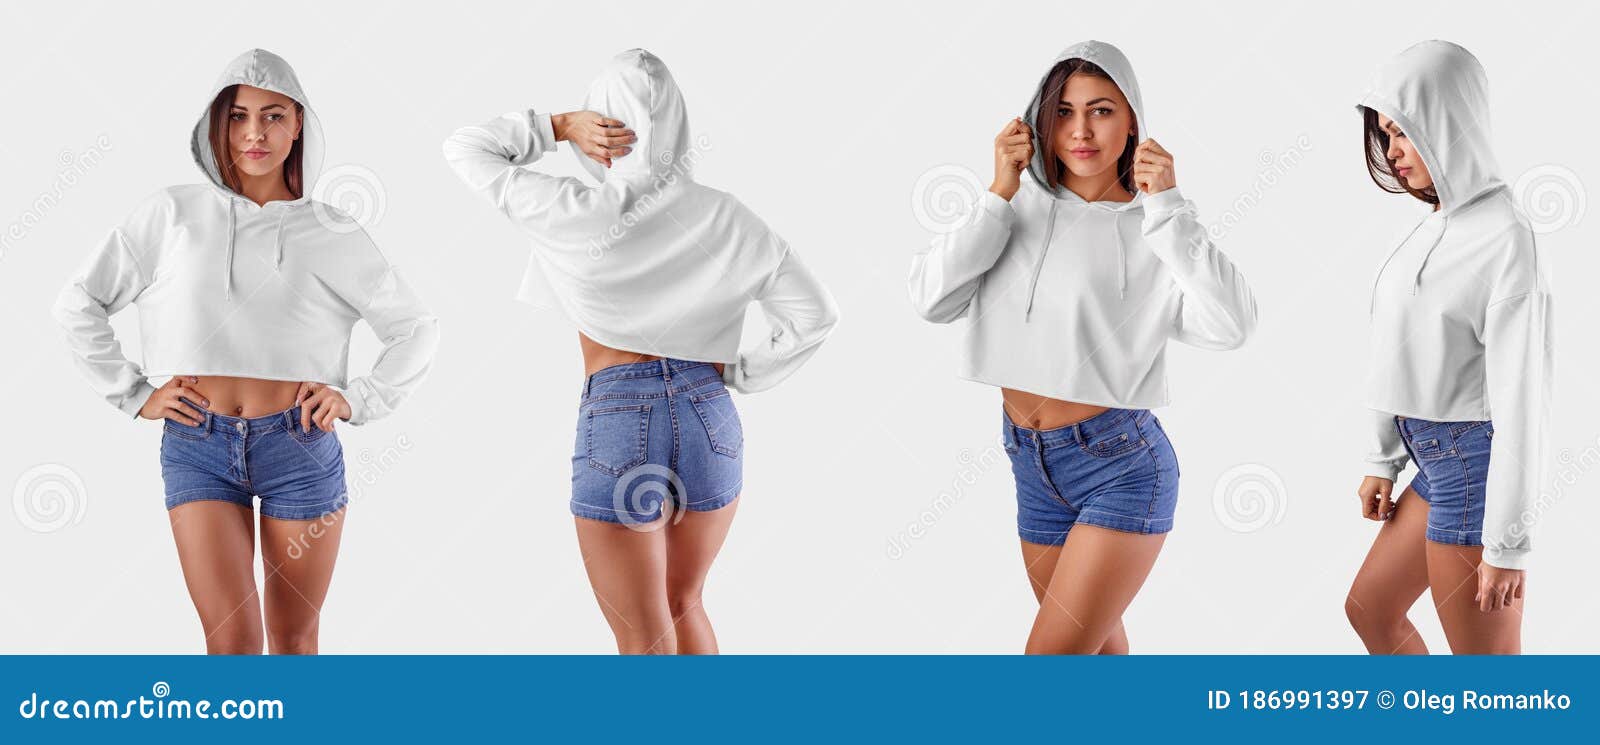 Template Fashionable White Hoodie Crop Top On A Girl In Shorts Front Side Back Stock Image Image Of Space Concept 186991397 Discover 1 crop top hoodie design on dribbble. dreamstime com